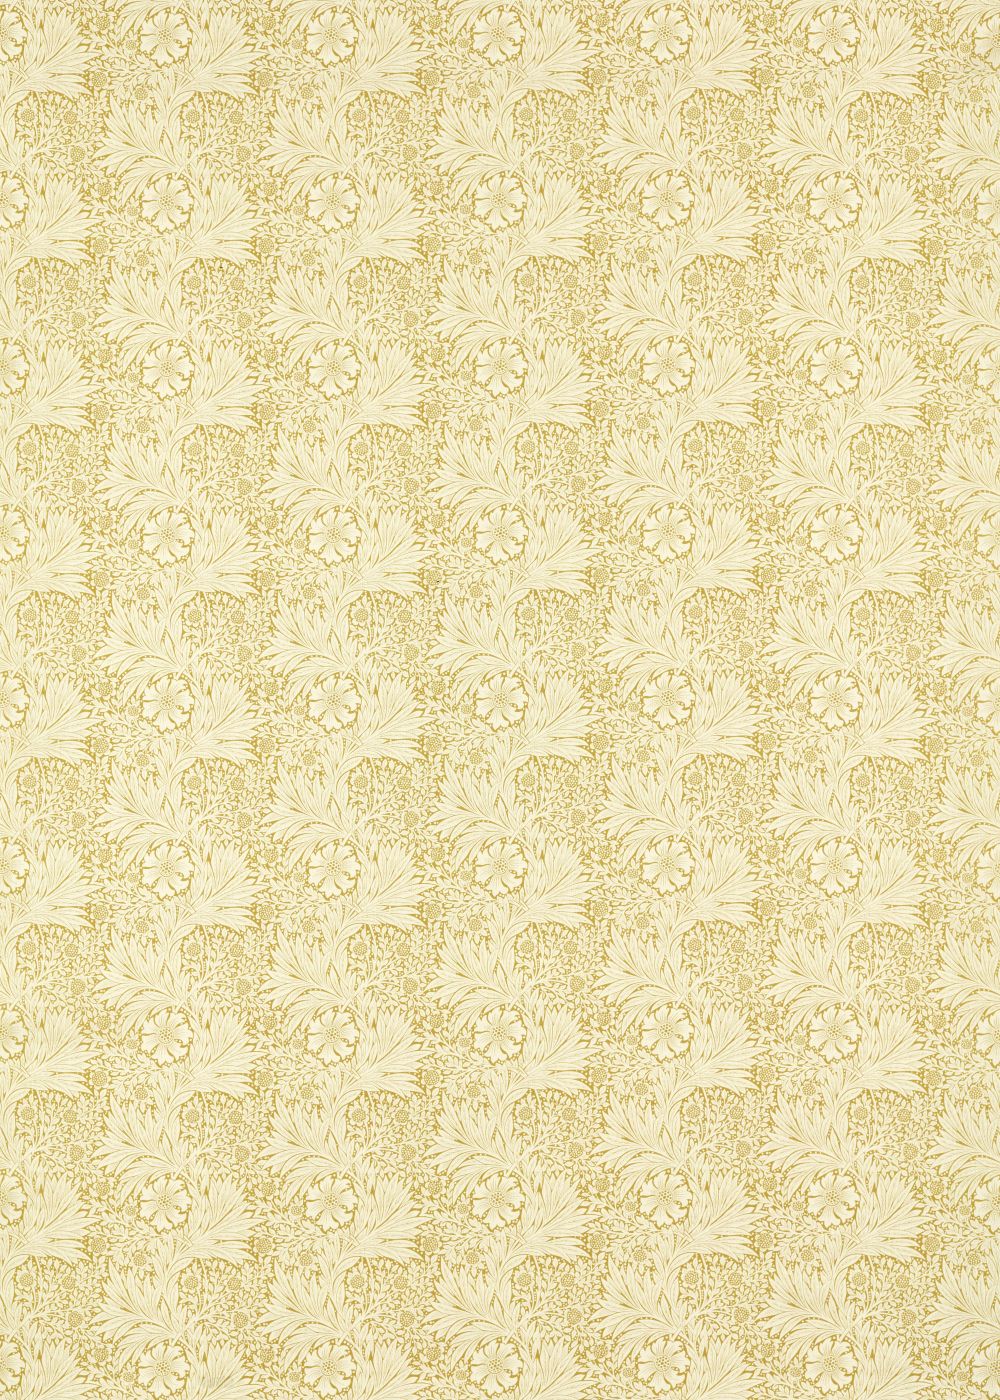 Marigold Fabric - Wheat - by Morris